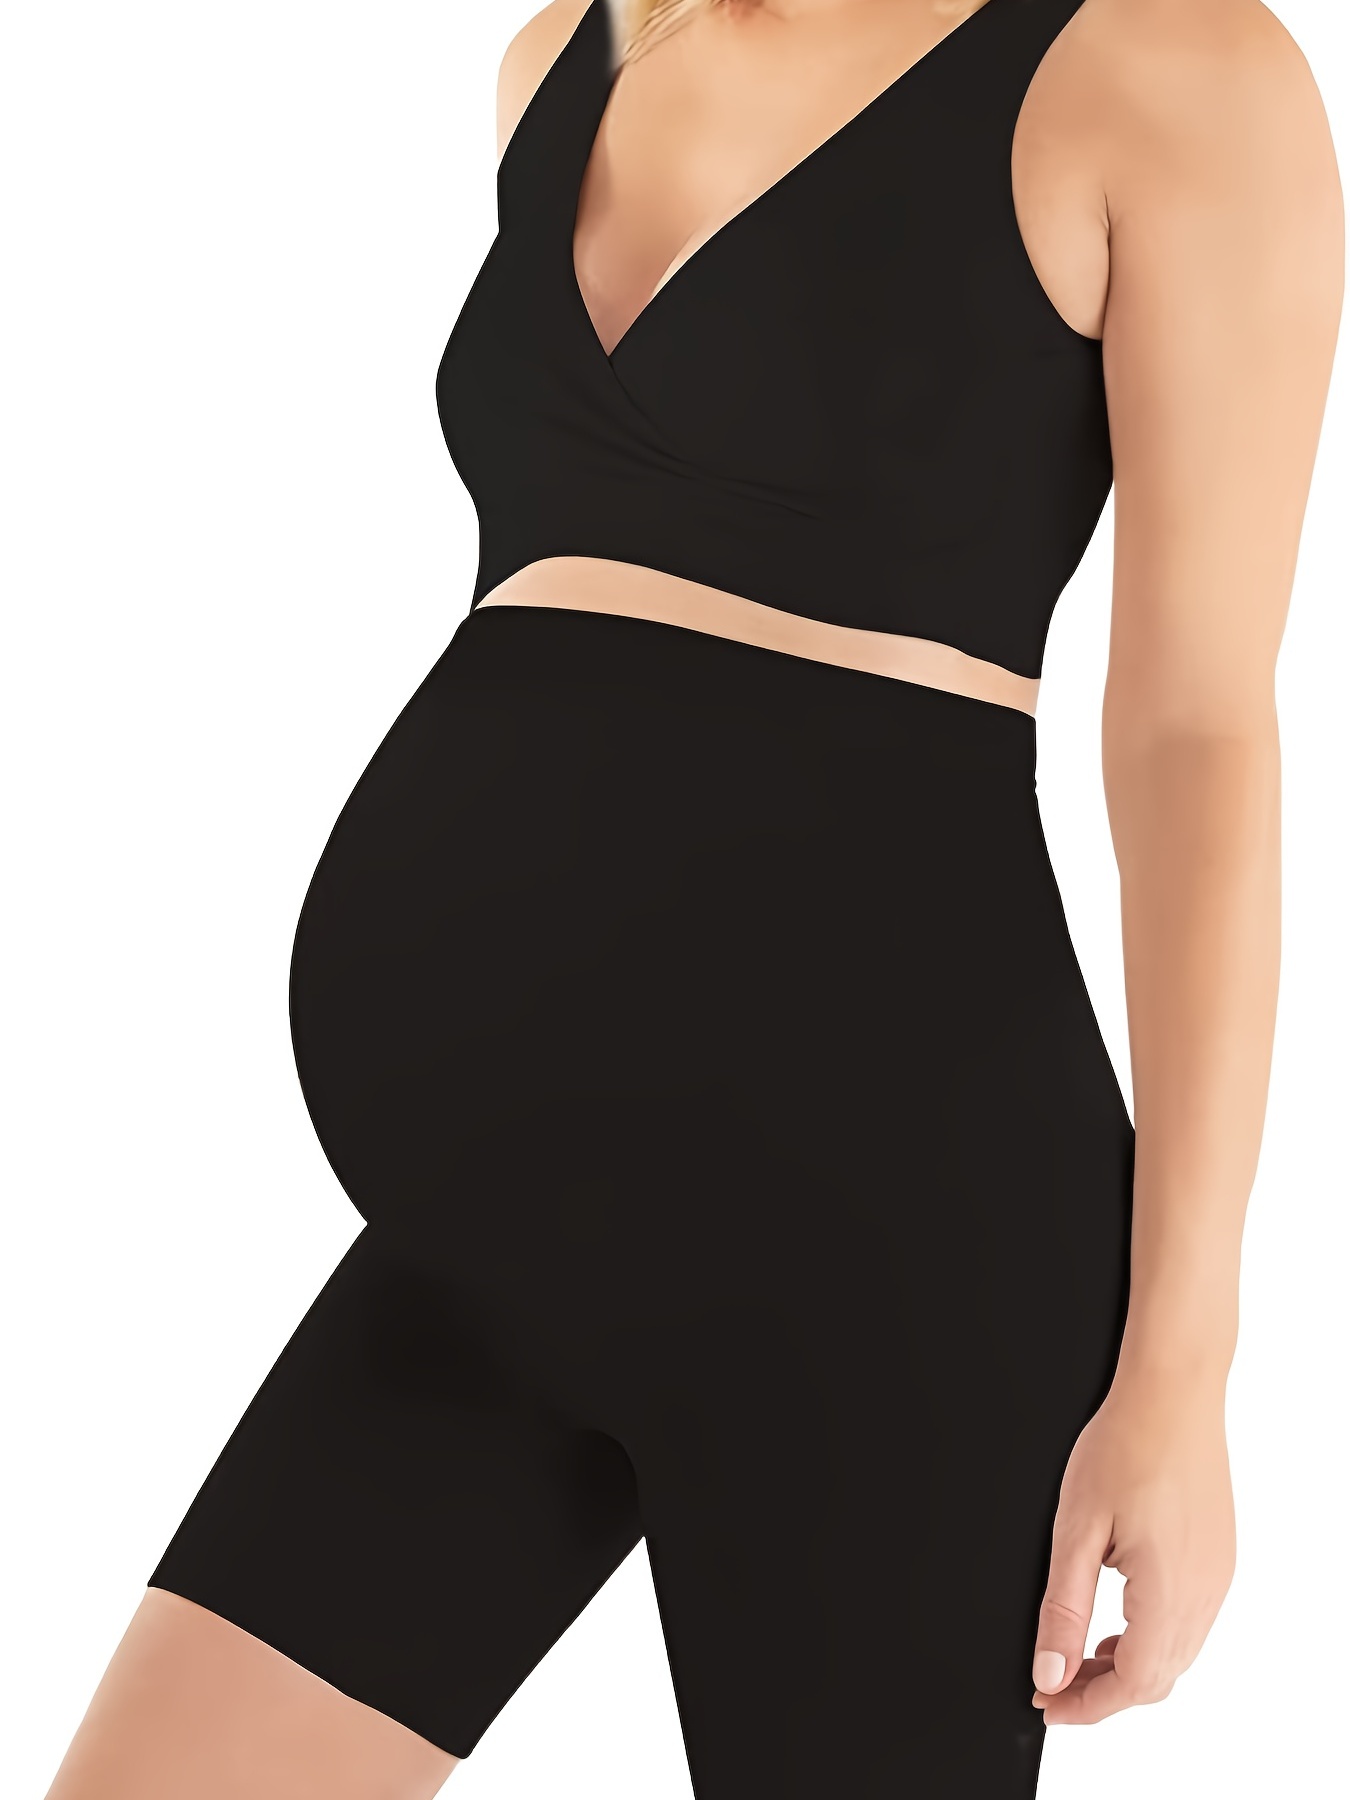 Is it safe to wear shapewear during pregnancy?